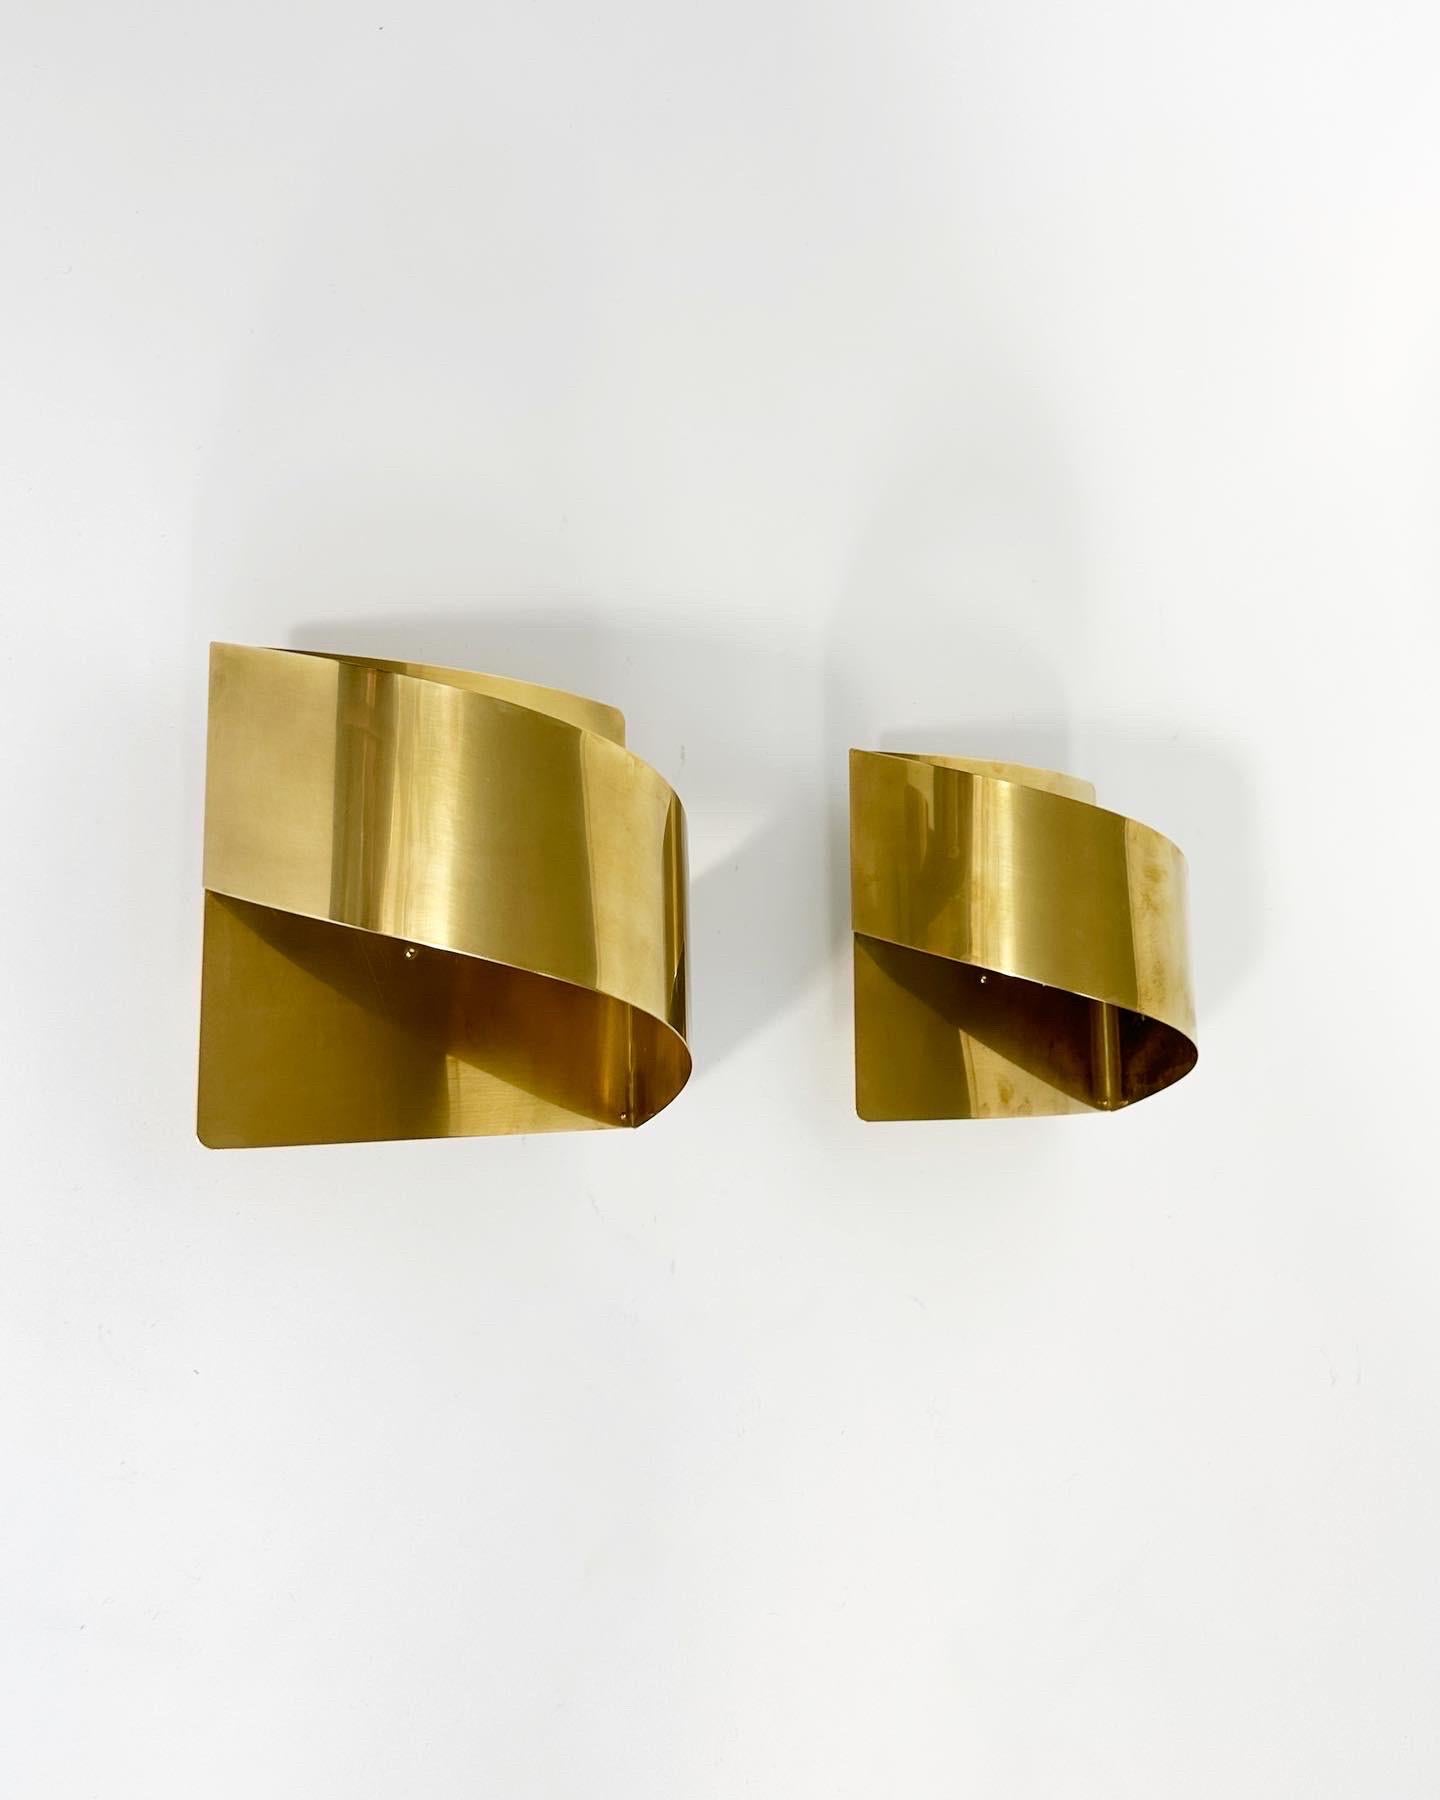 A pair of Peter Celsing ‚Band‘ wall lamps for Falkenbergs Belysning in Sweden, 1970s.

Made of solid brass with a beautiful subtle patina and original ceramic sockets.

One of the lamps still has the manufacturers sticker on the backside.

Width: 20